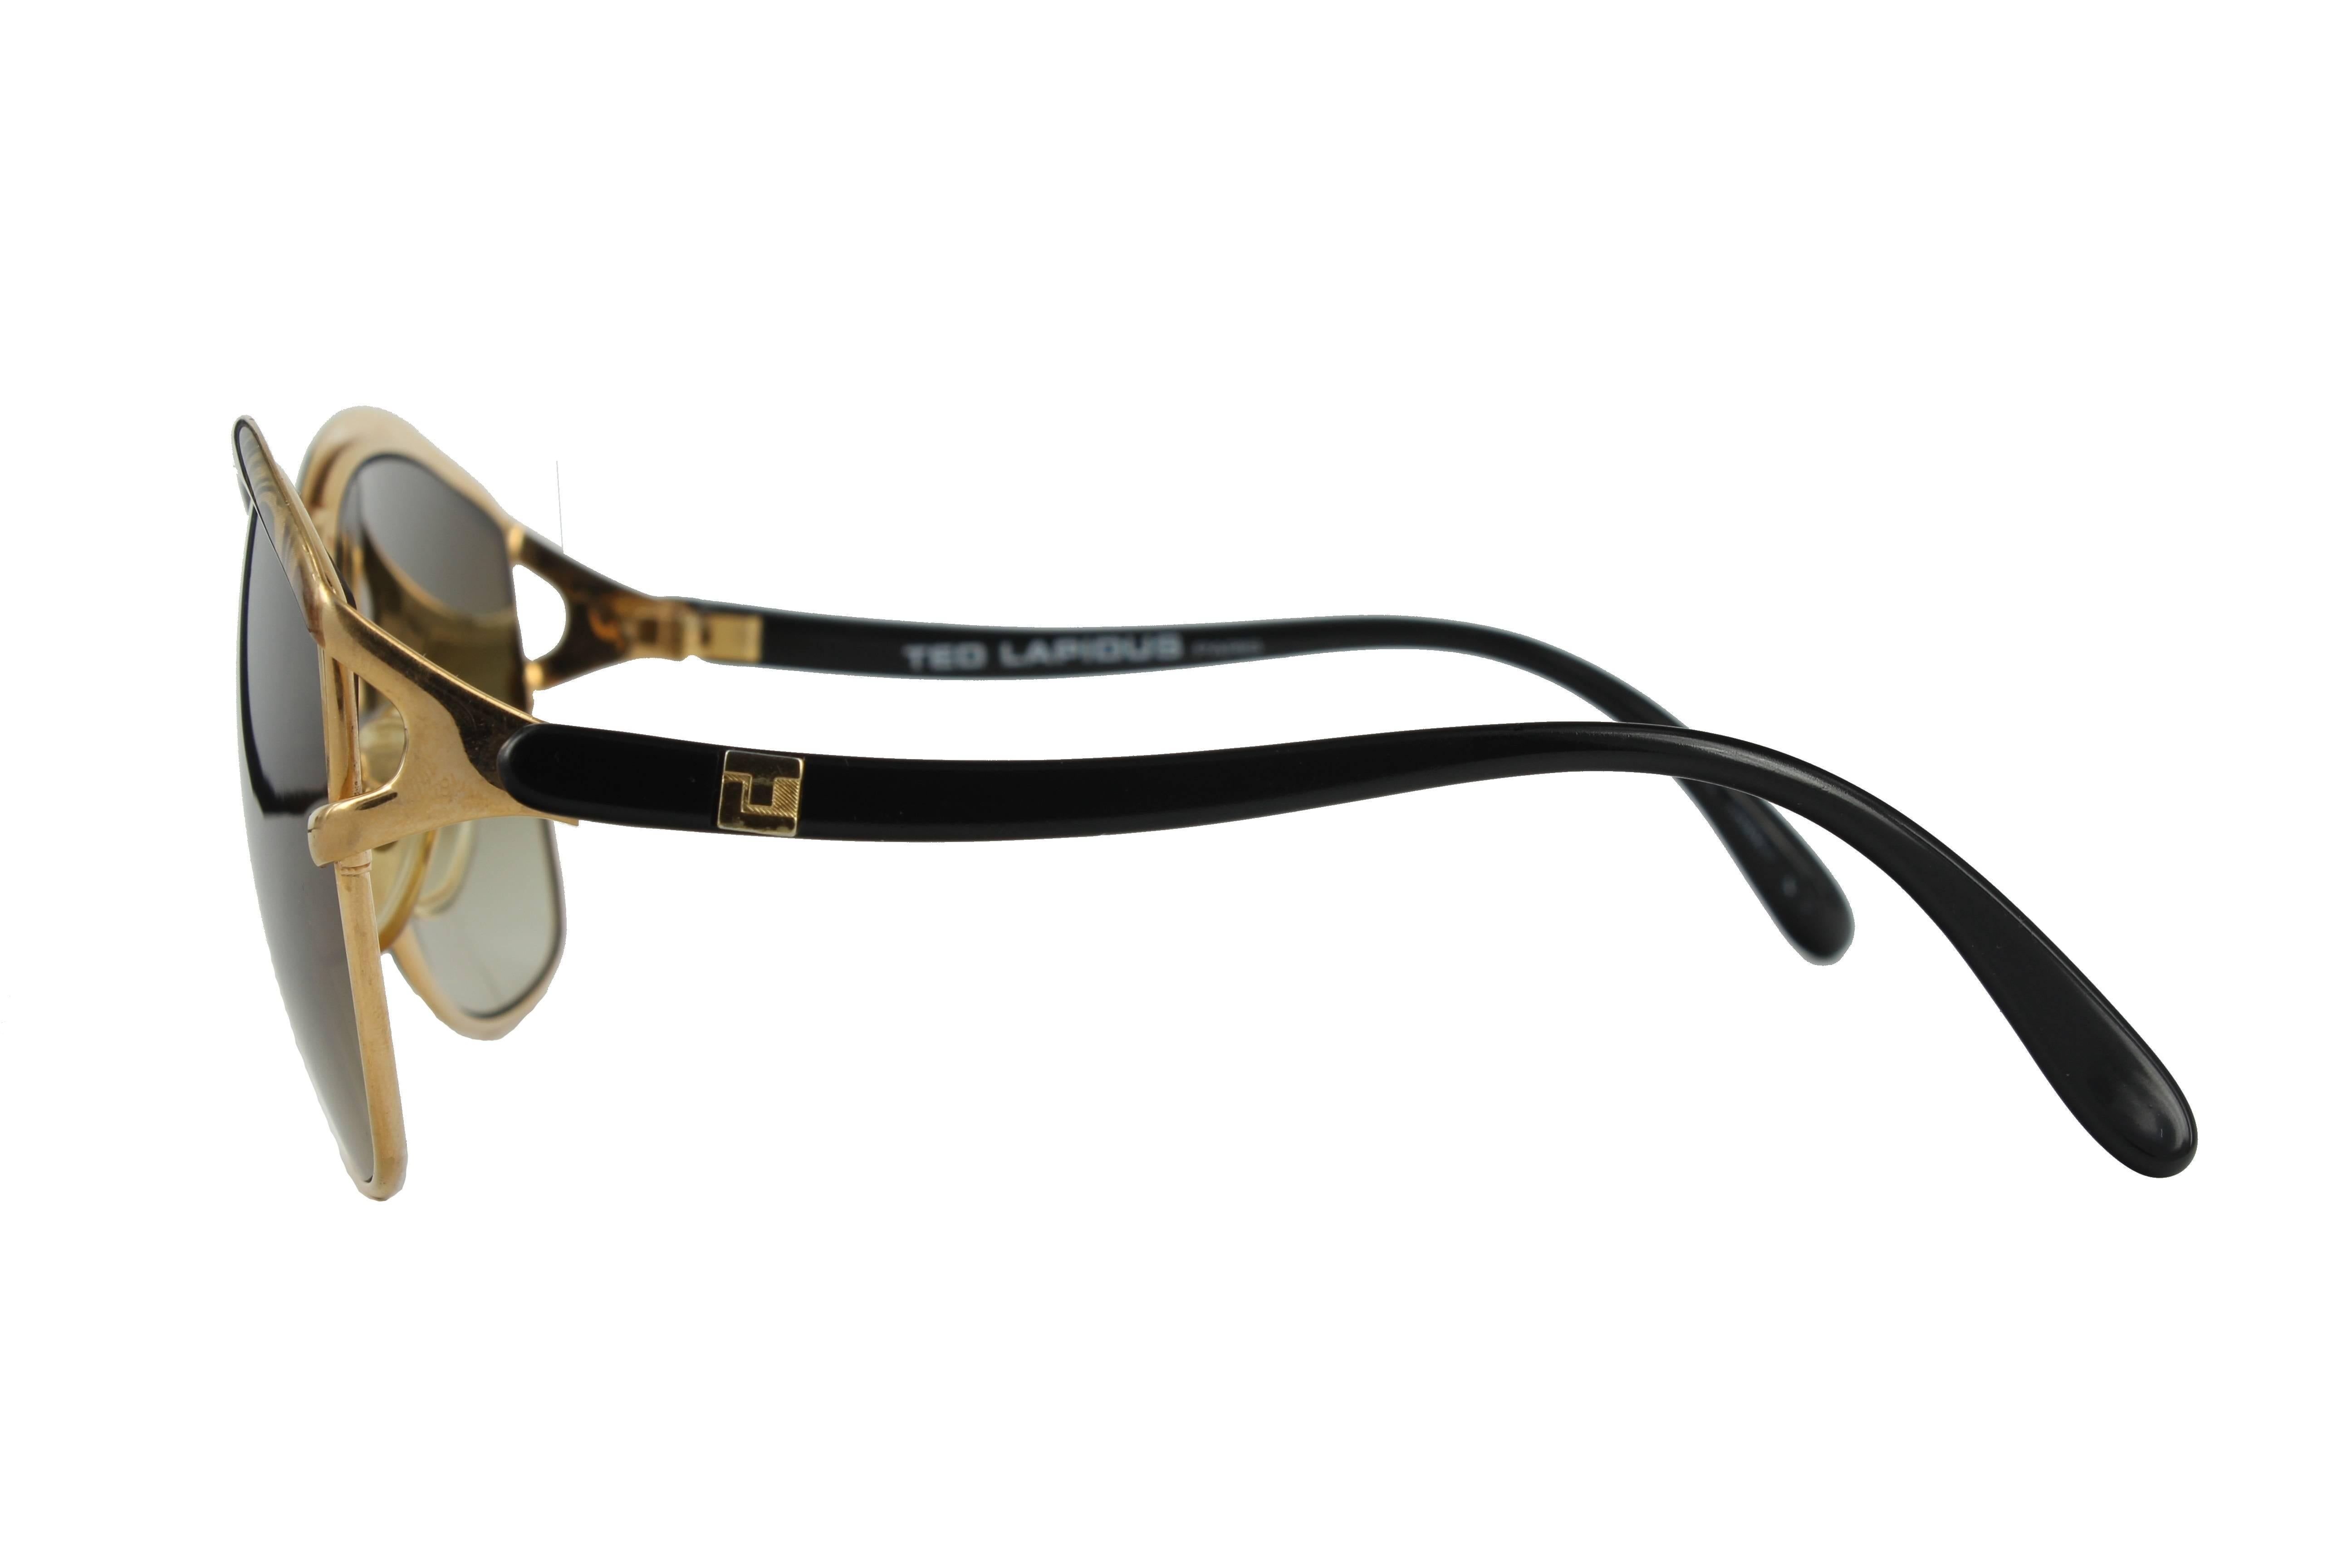 Casual and chic sunglasses made by Ted Lapidus in the 80´s. Its golden metal frame has a beautiful detail in gold and brown on the top that combines with the dark color of the temples. Gradient Brown Lenses.

Measurements
- Distance between temples